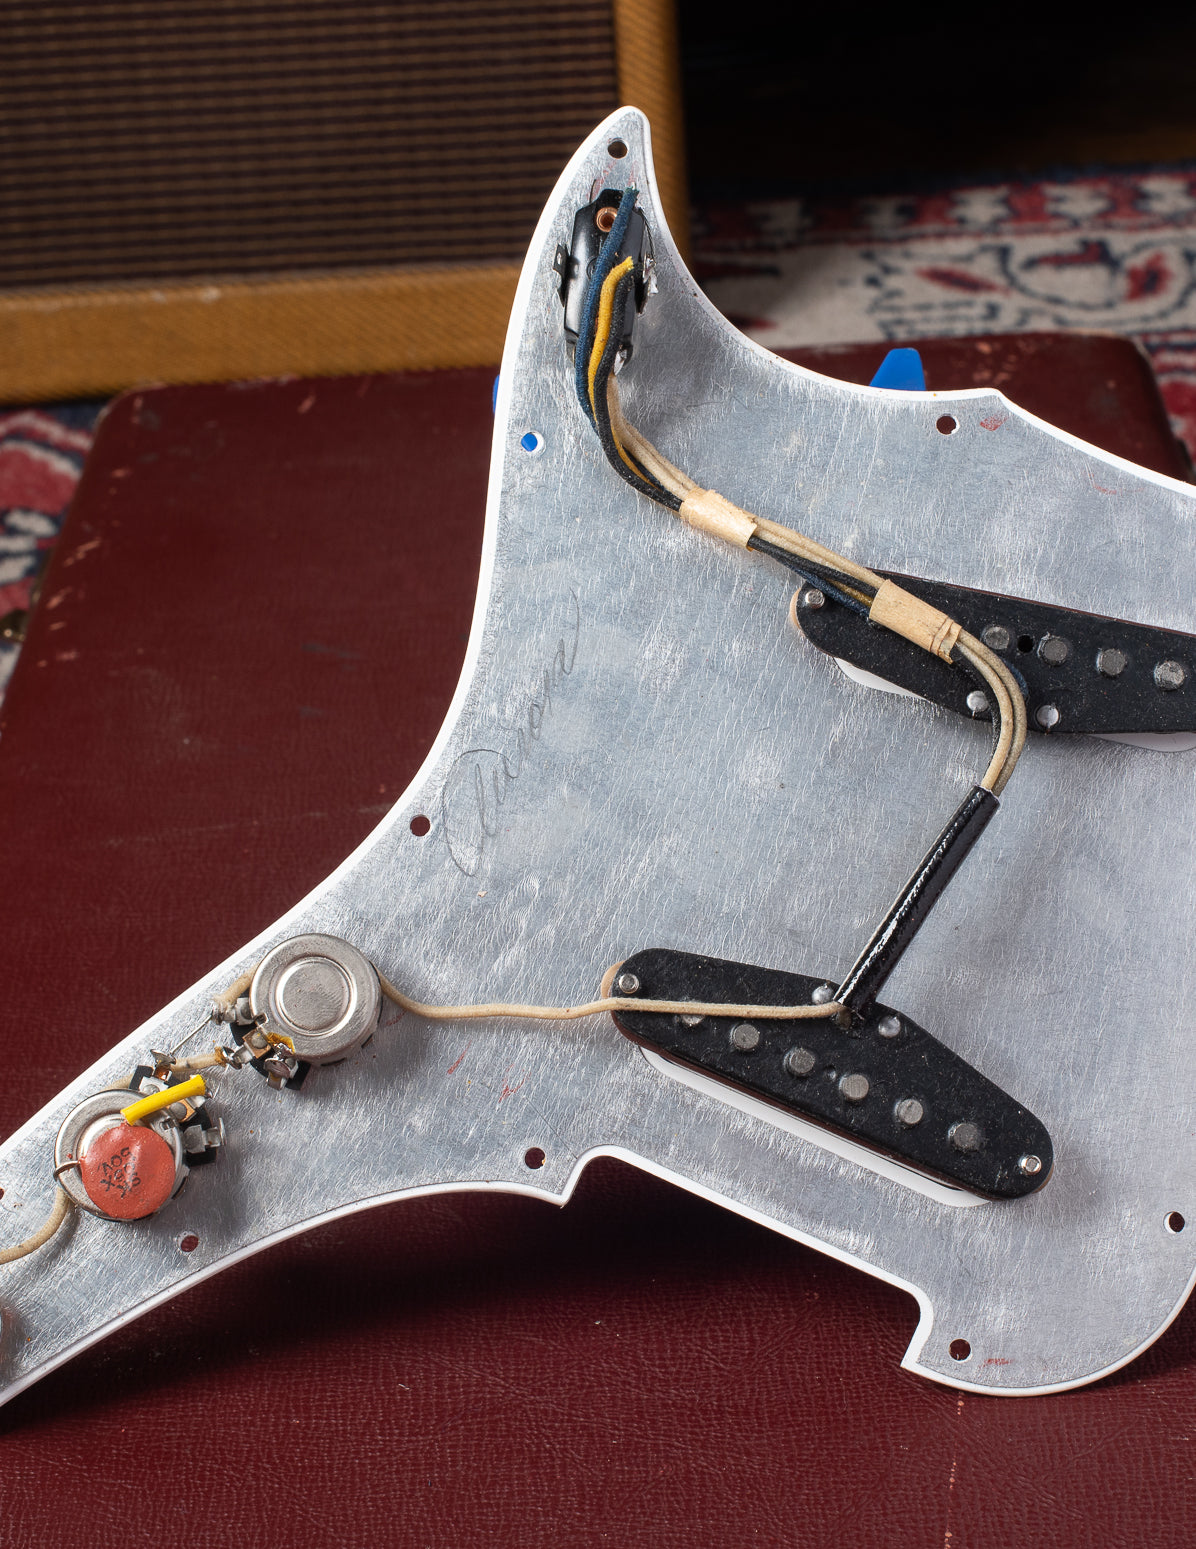 Under pickguard with black bobbin pickups and potentiometers